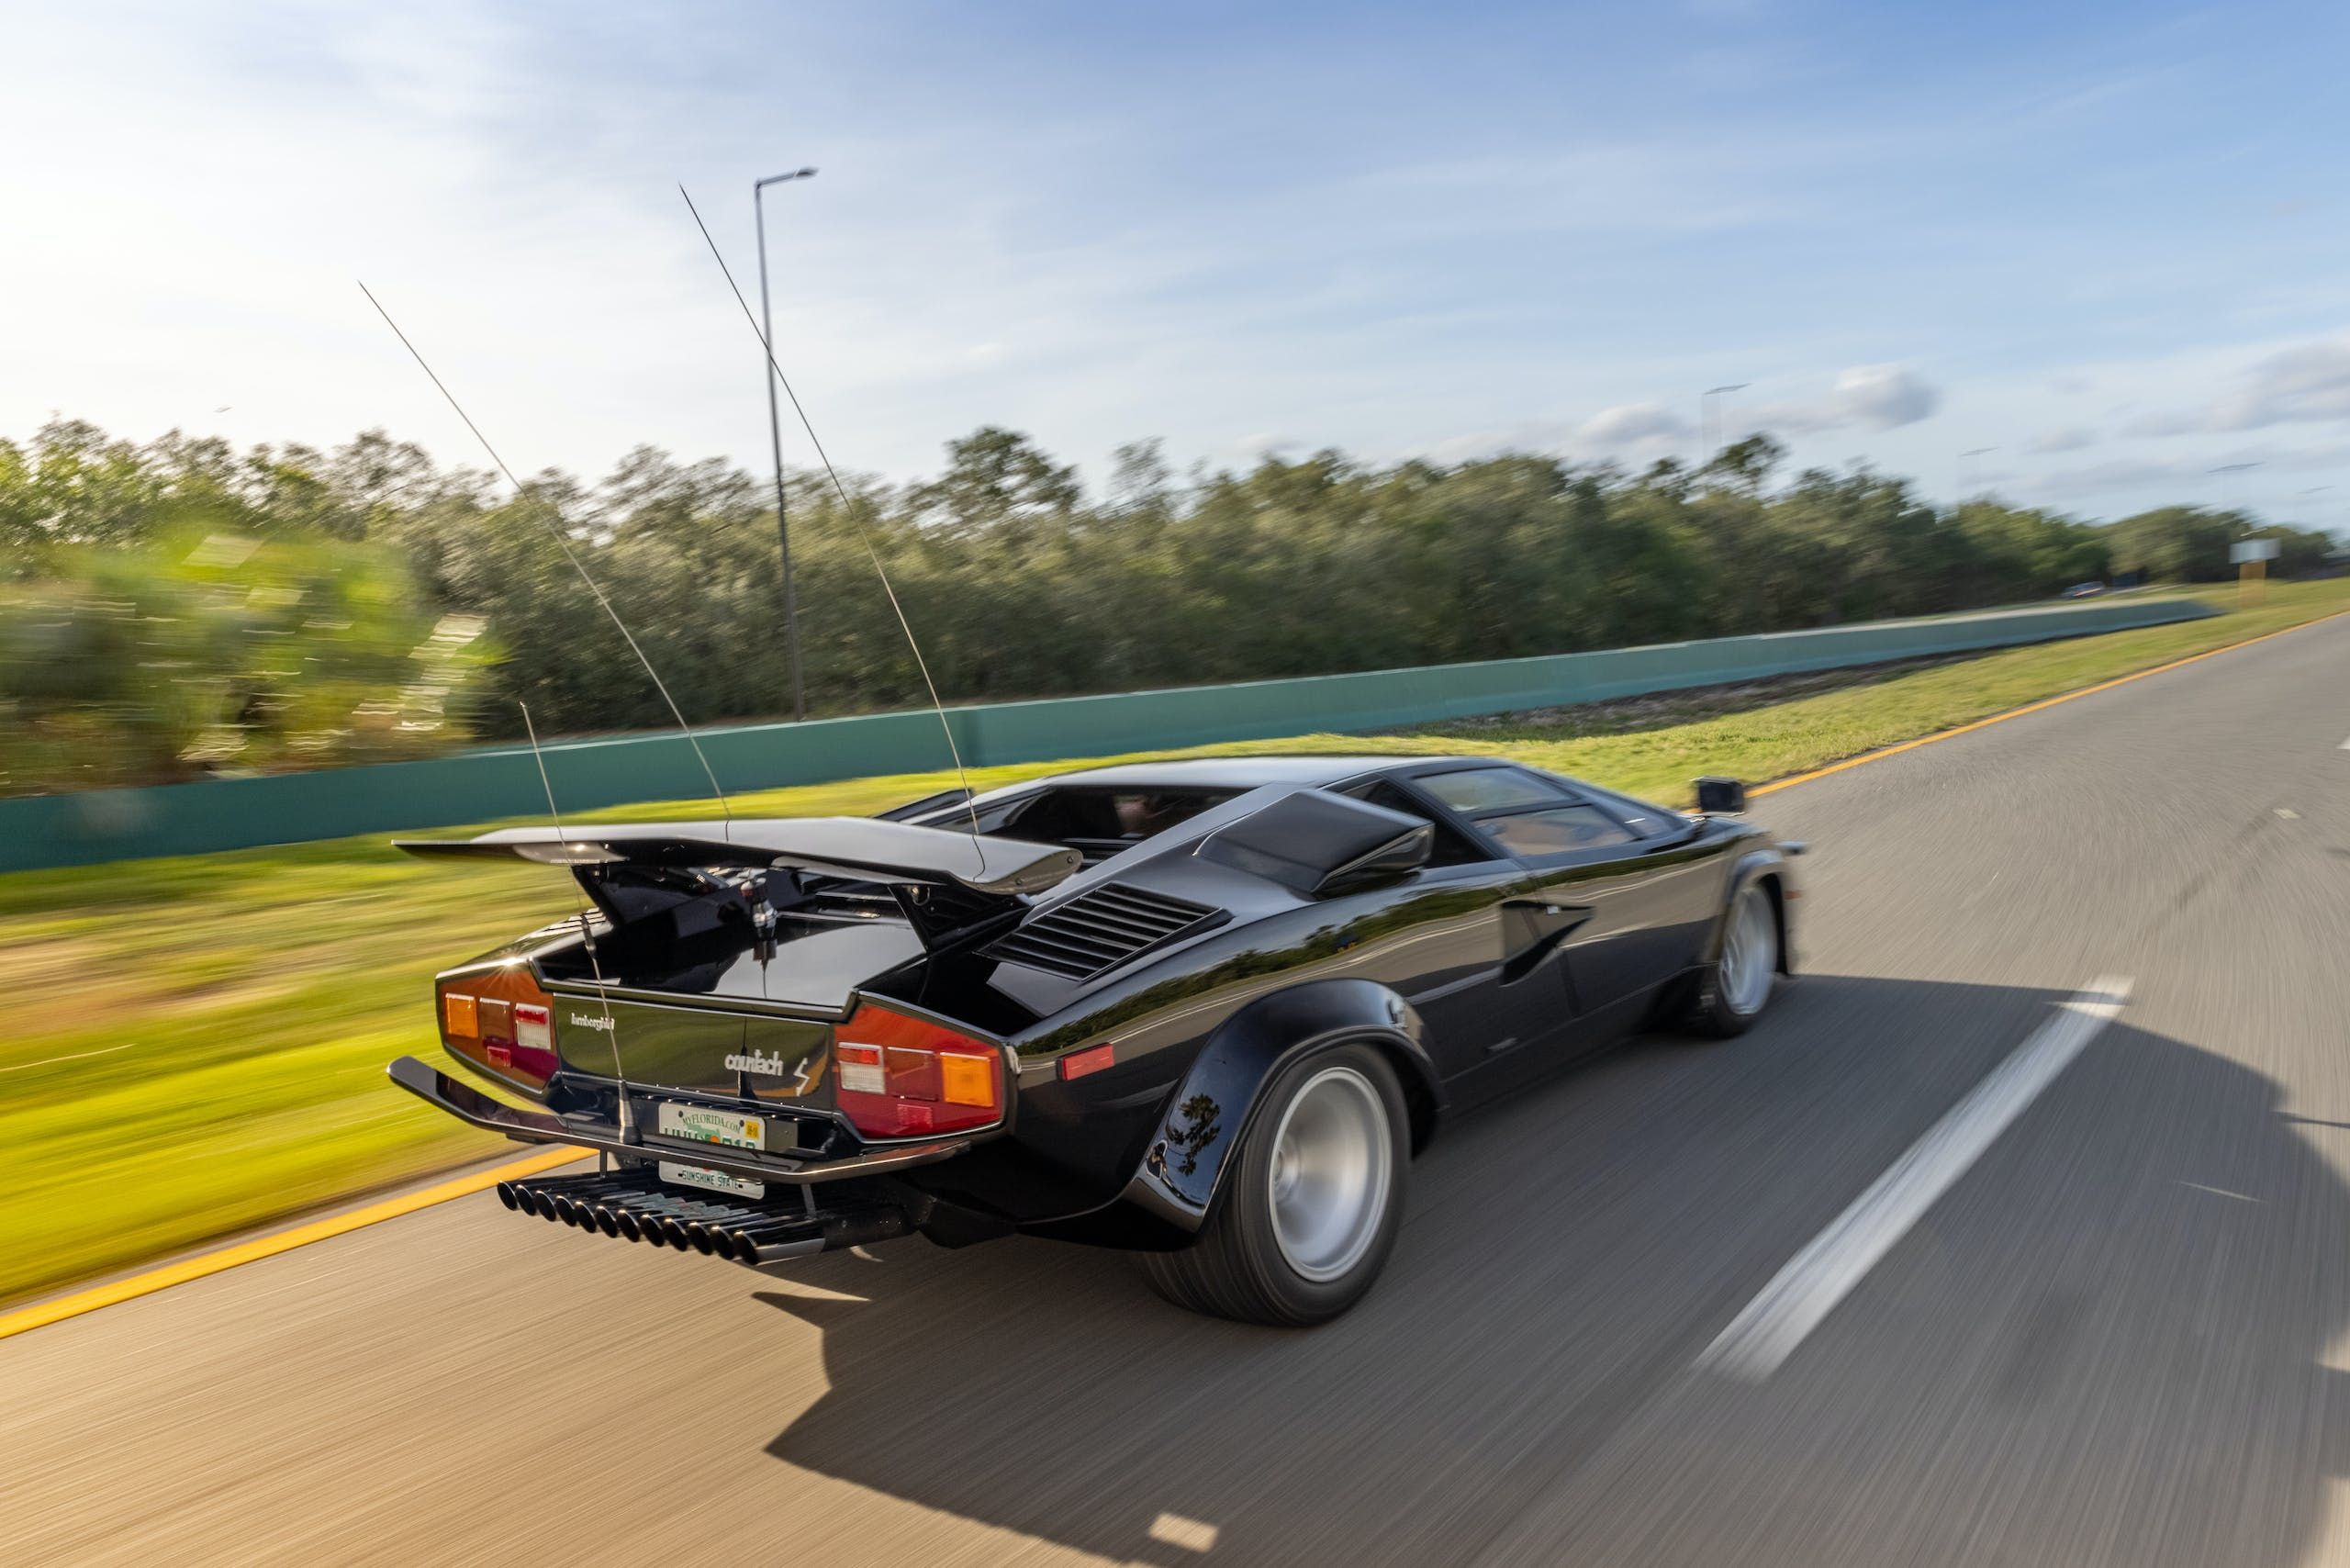 Cannonball Run' Countach wins place on Historic Vehicle Registry